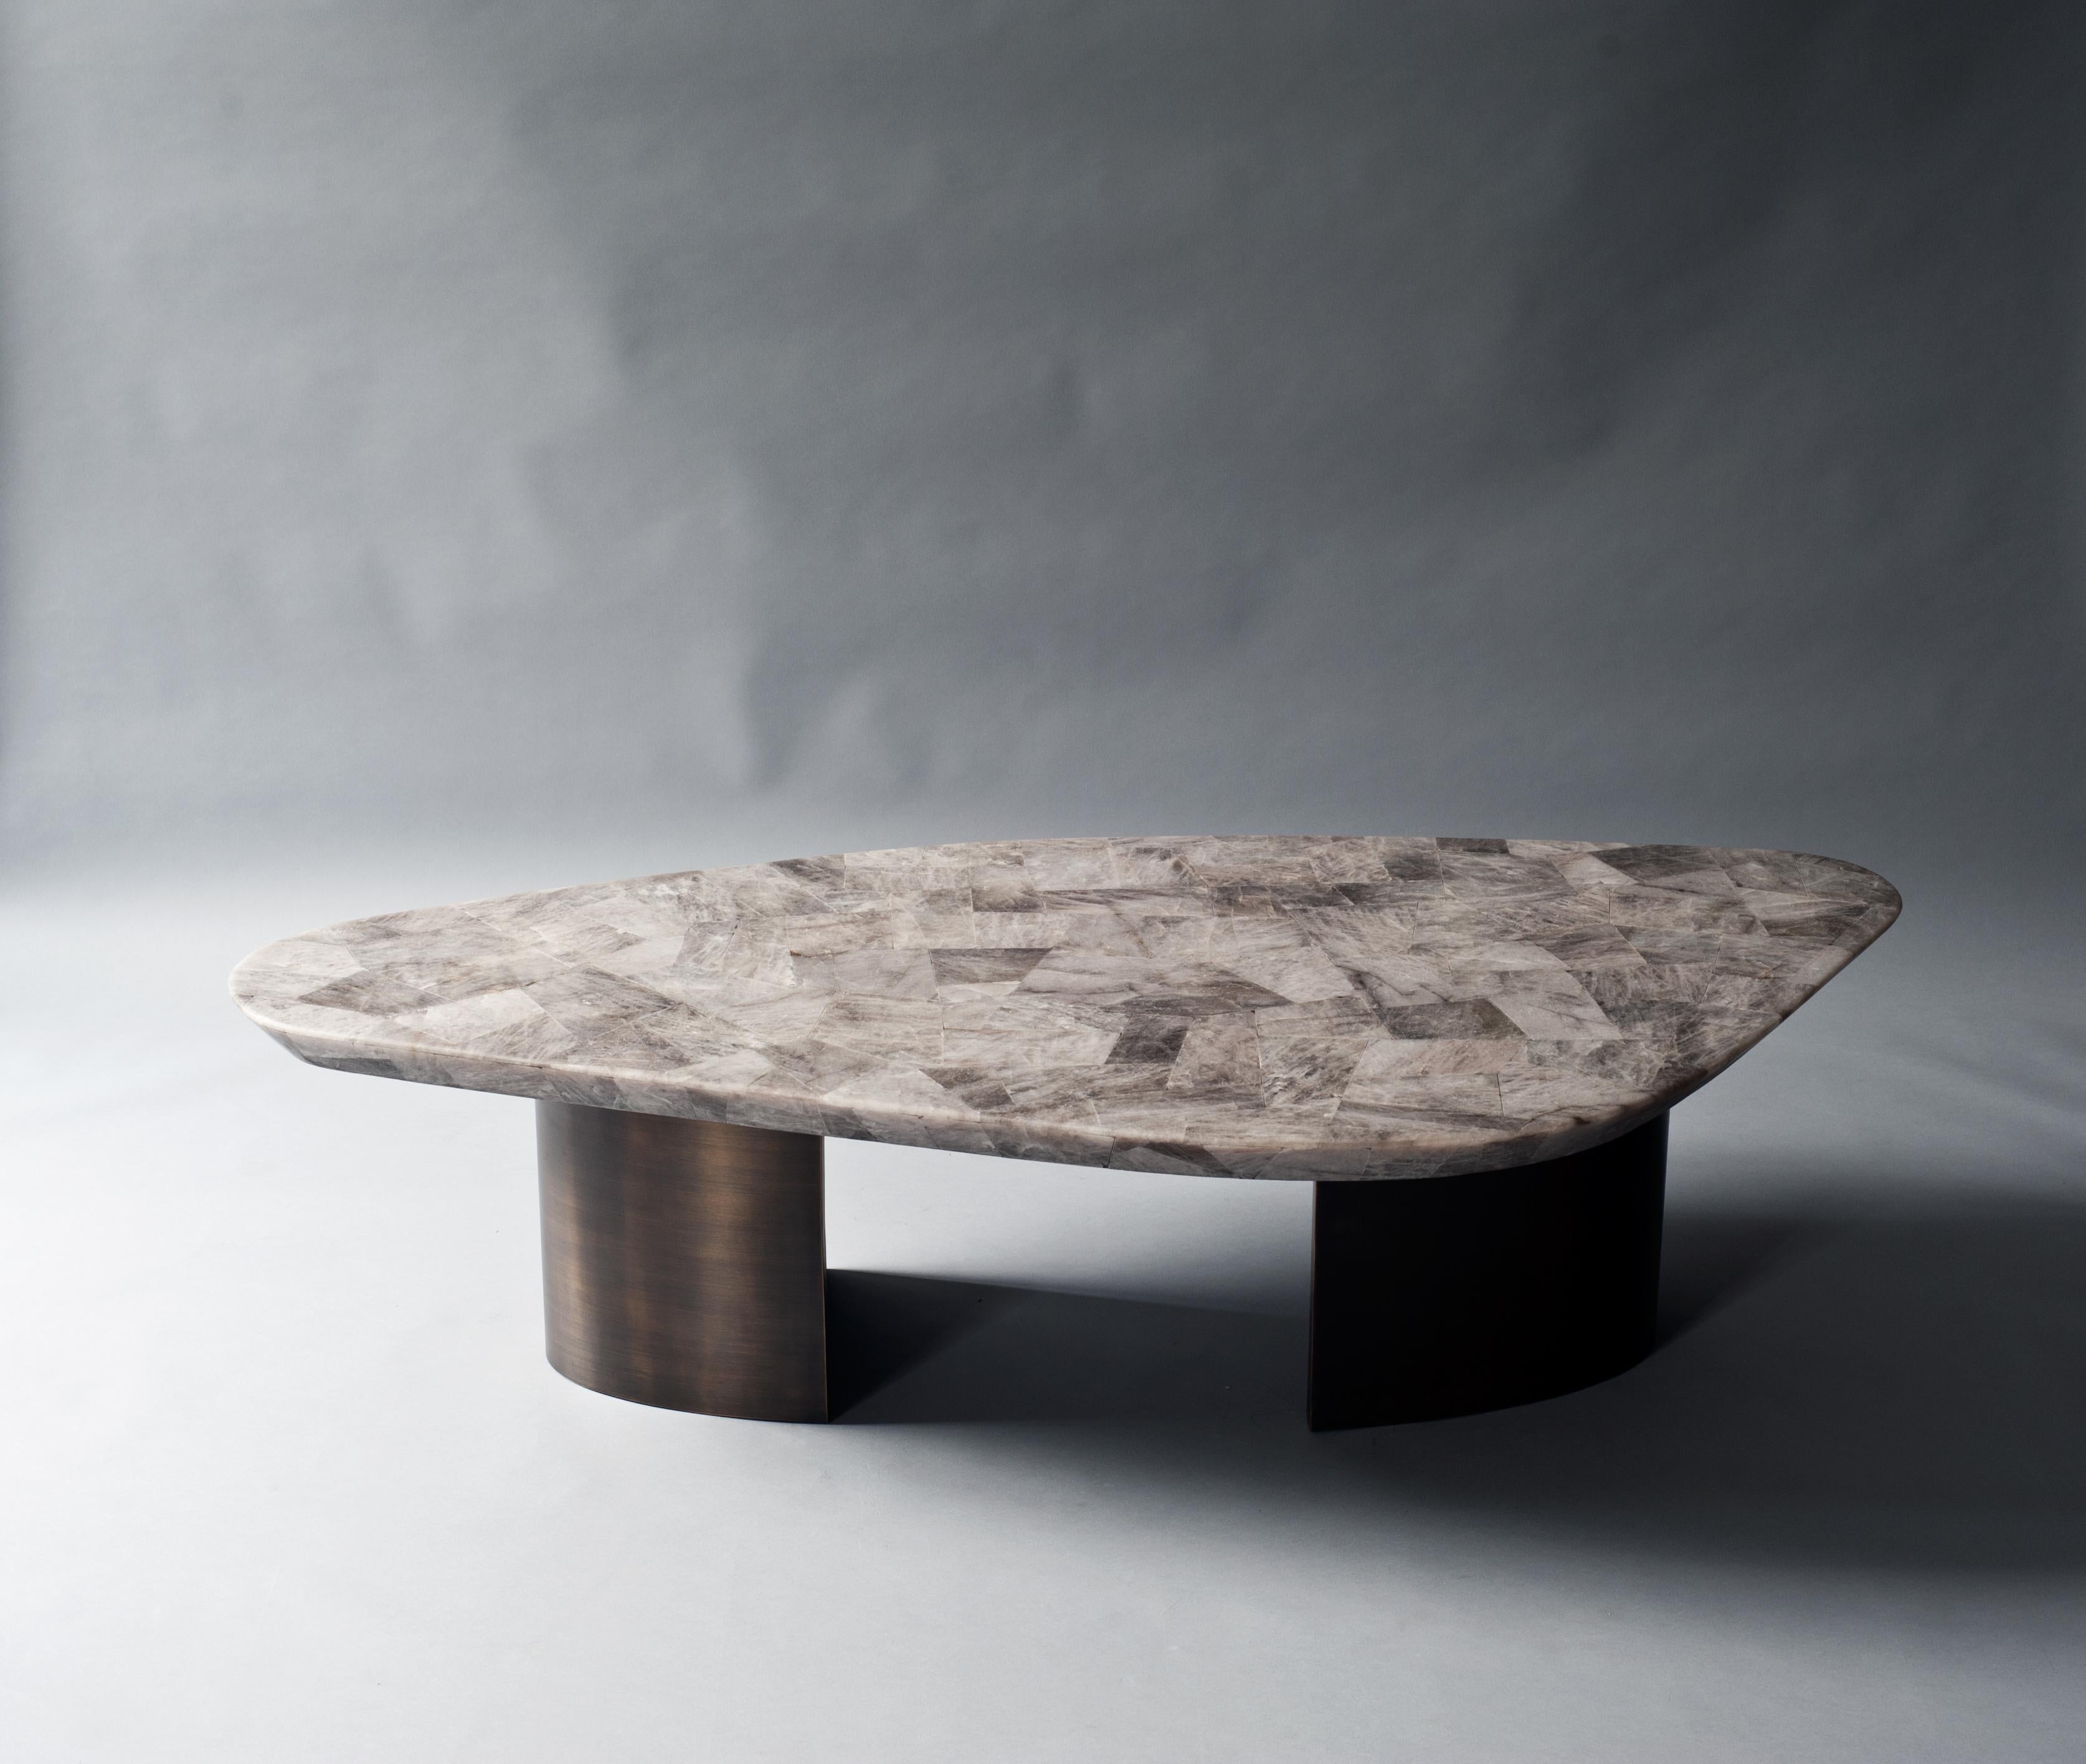 Ledge coffee table by DeMuro Das 
Dimensions: W 162.2 x D 80.7 x H 39.4 cm
Materials: Quartz (Smokey) - Leather (Random)
 Solid brass (Antique)

Dimensions and finishes can be customized

DeMuro Das is an international design firm and the